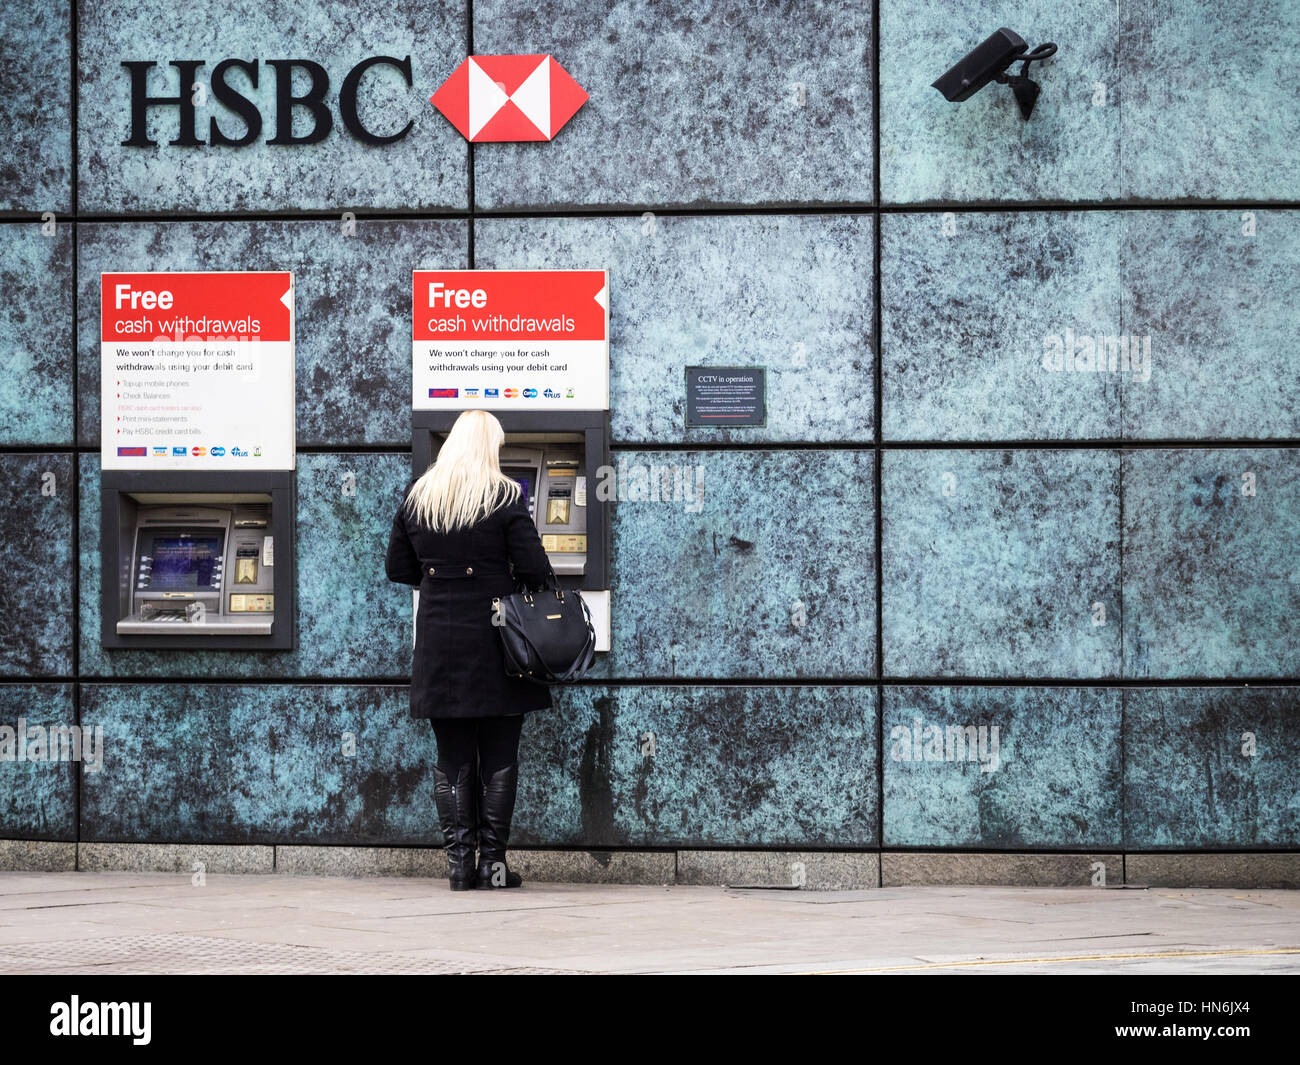 HSBC Cash Machines London - A woman uses a HSBC cash machines in Central London with security cameras monitoring the ATMs. Stock Photo